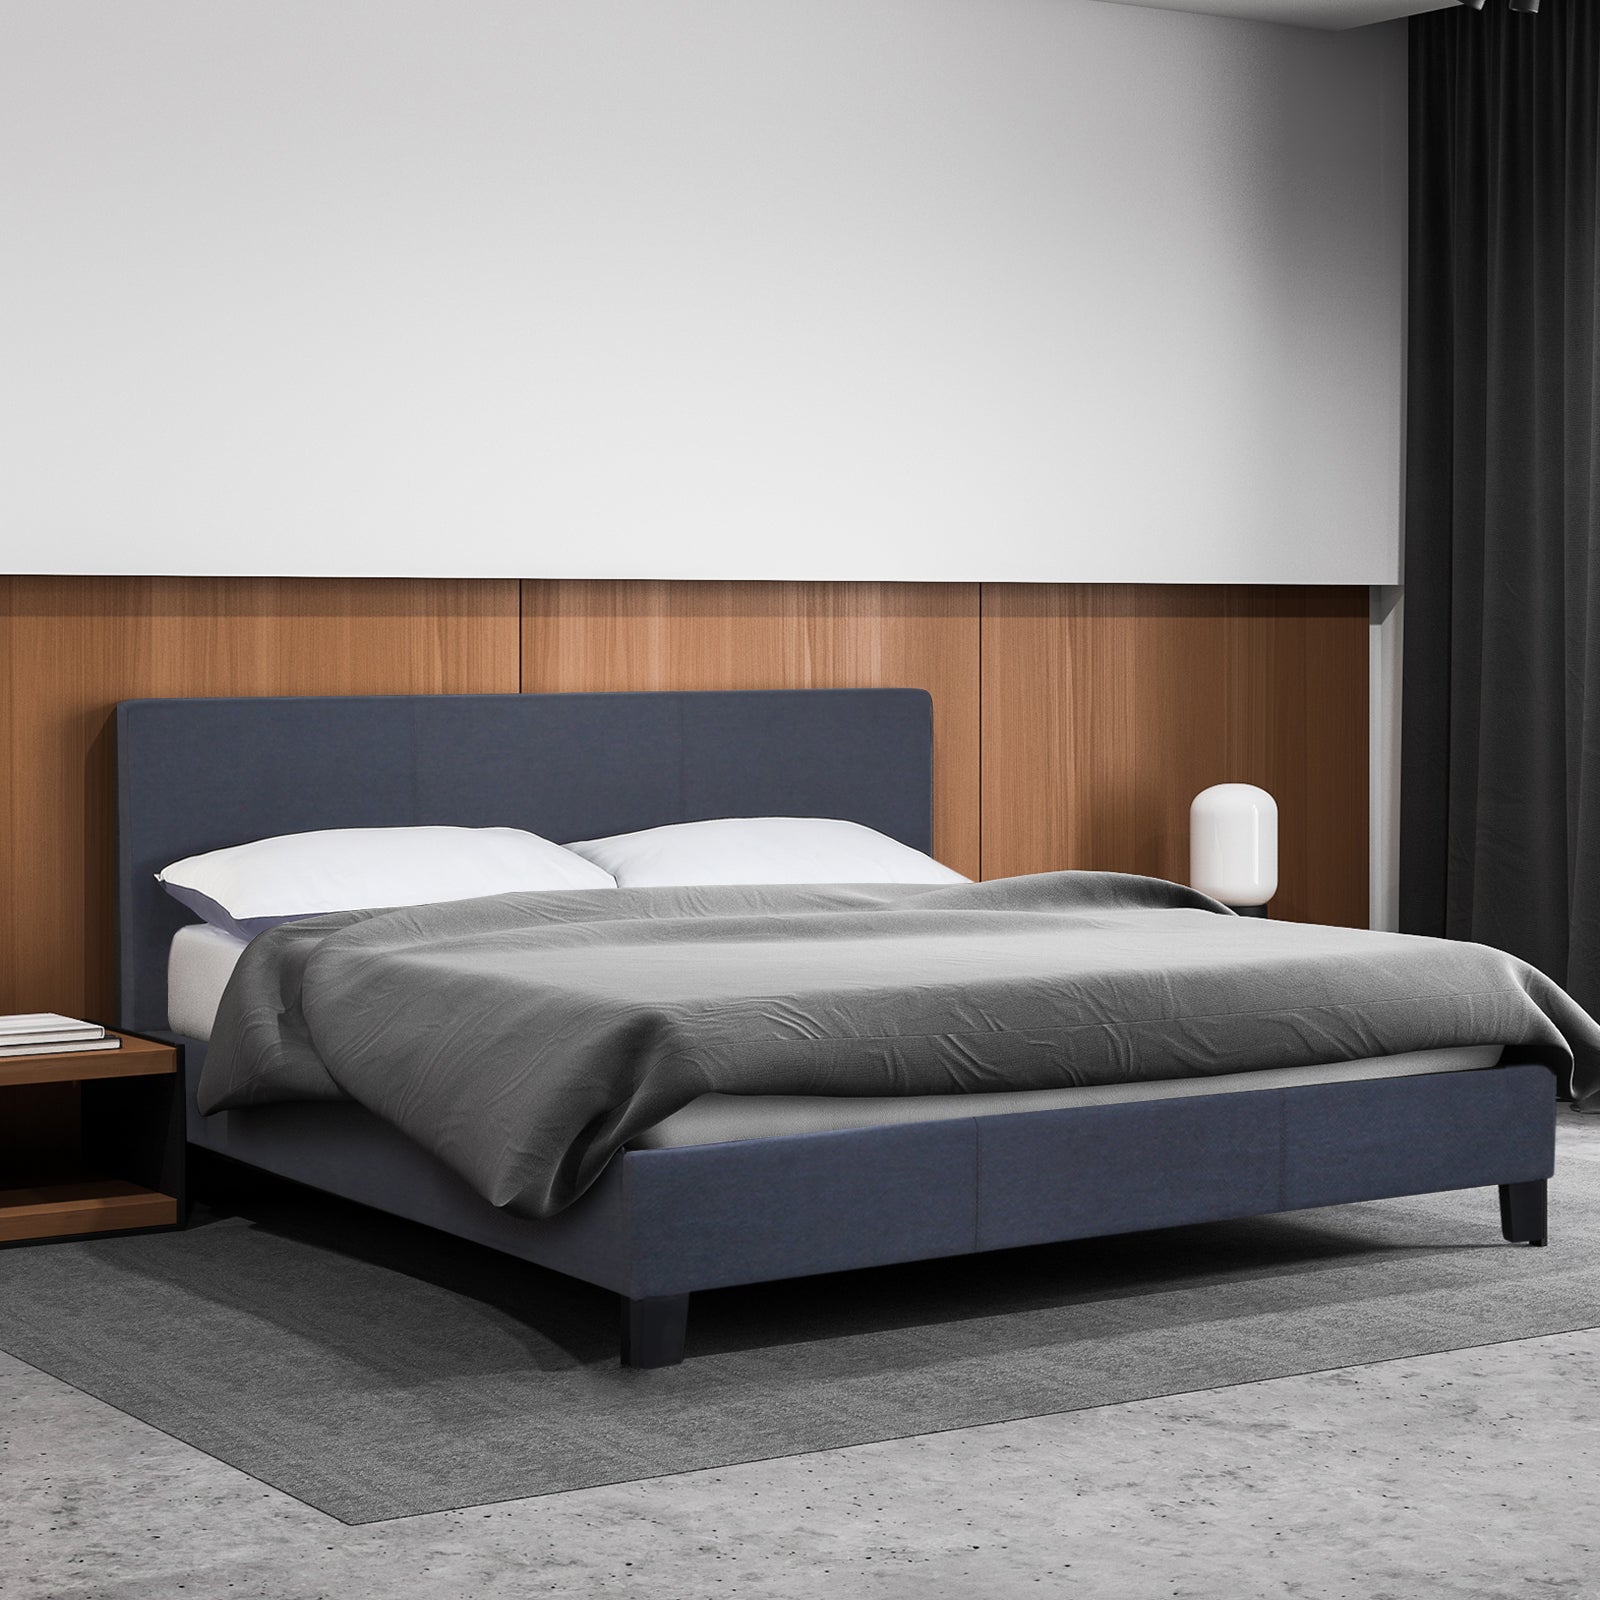 Milano Sienna Luxury Bed with Headboard (Model 2) - Charcoal No.35 - Queen